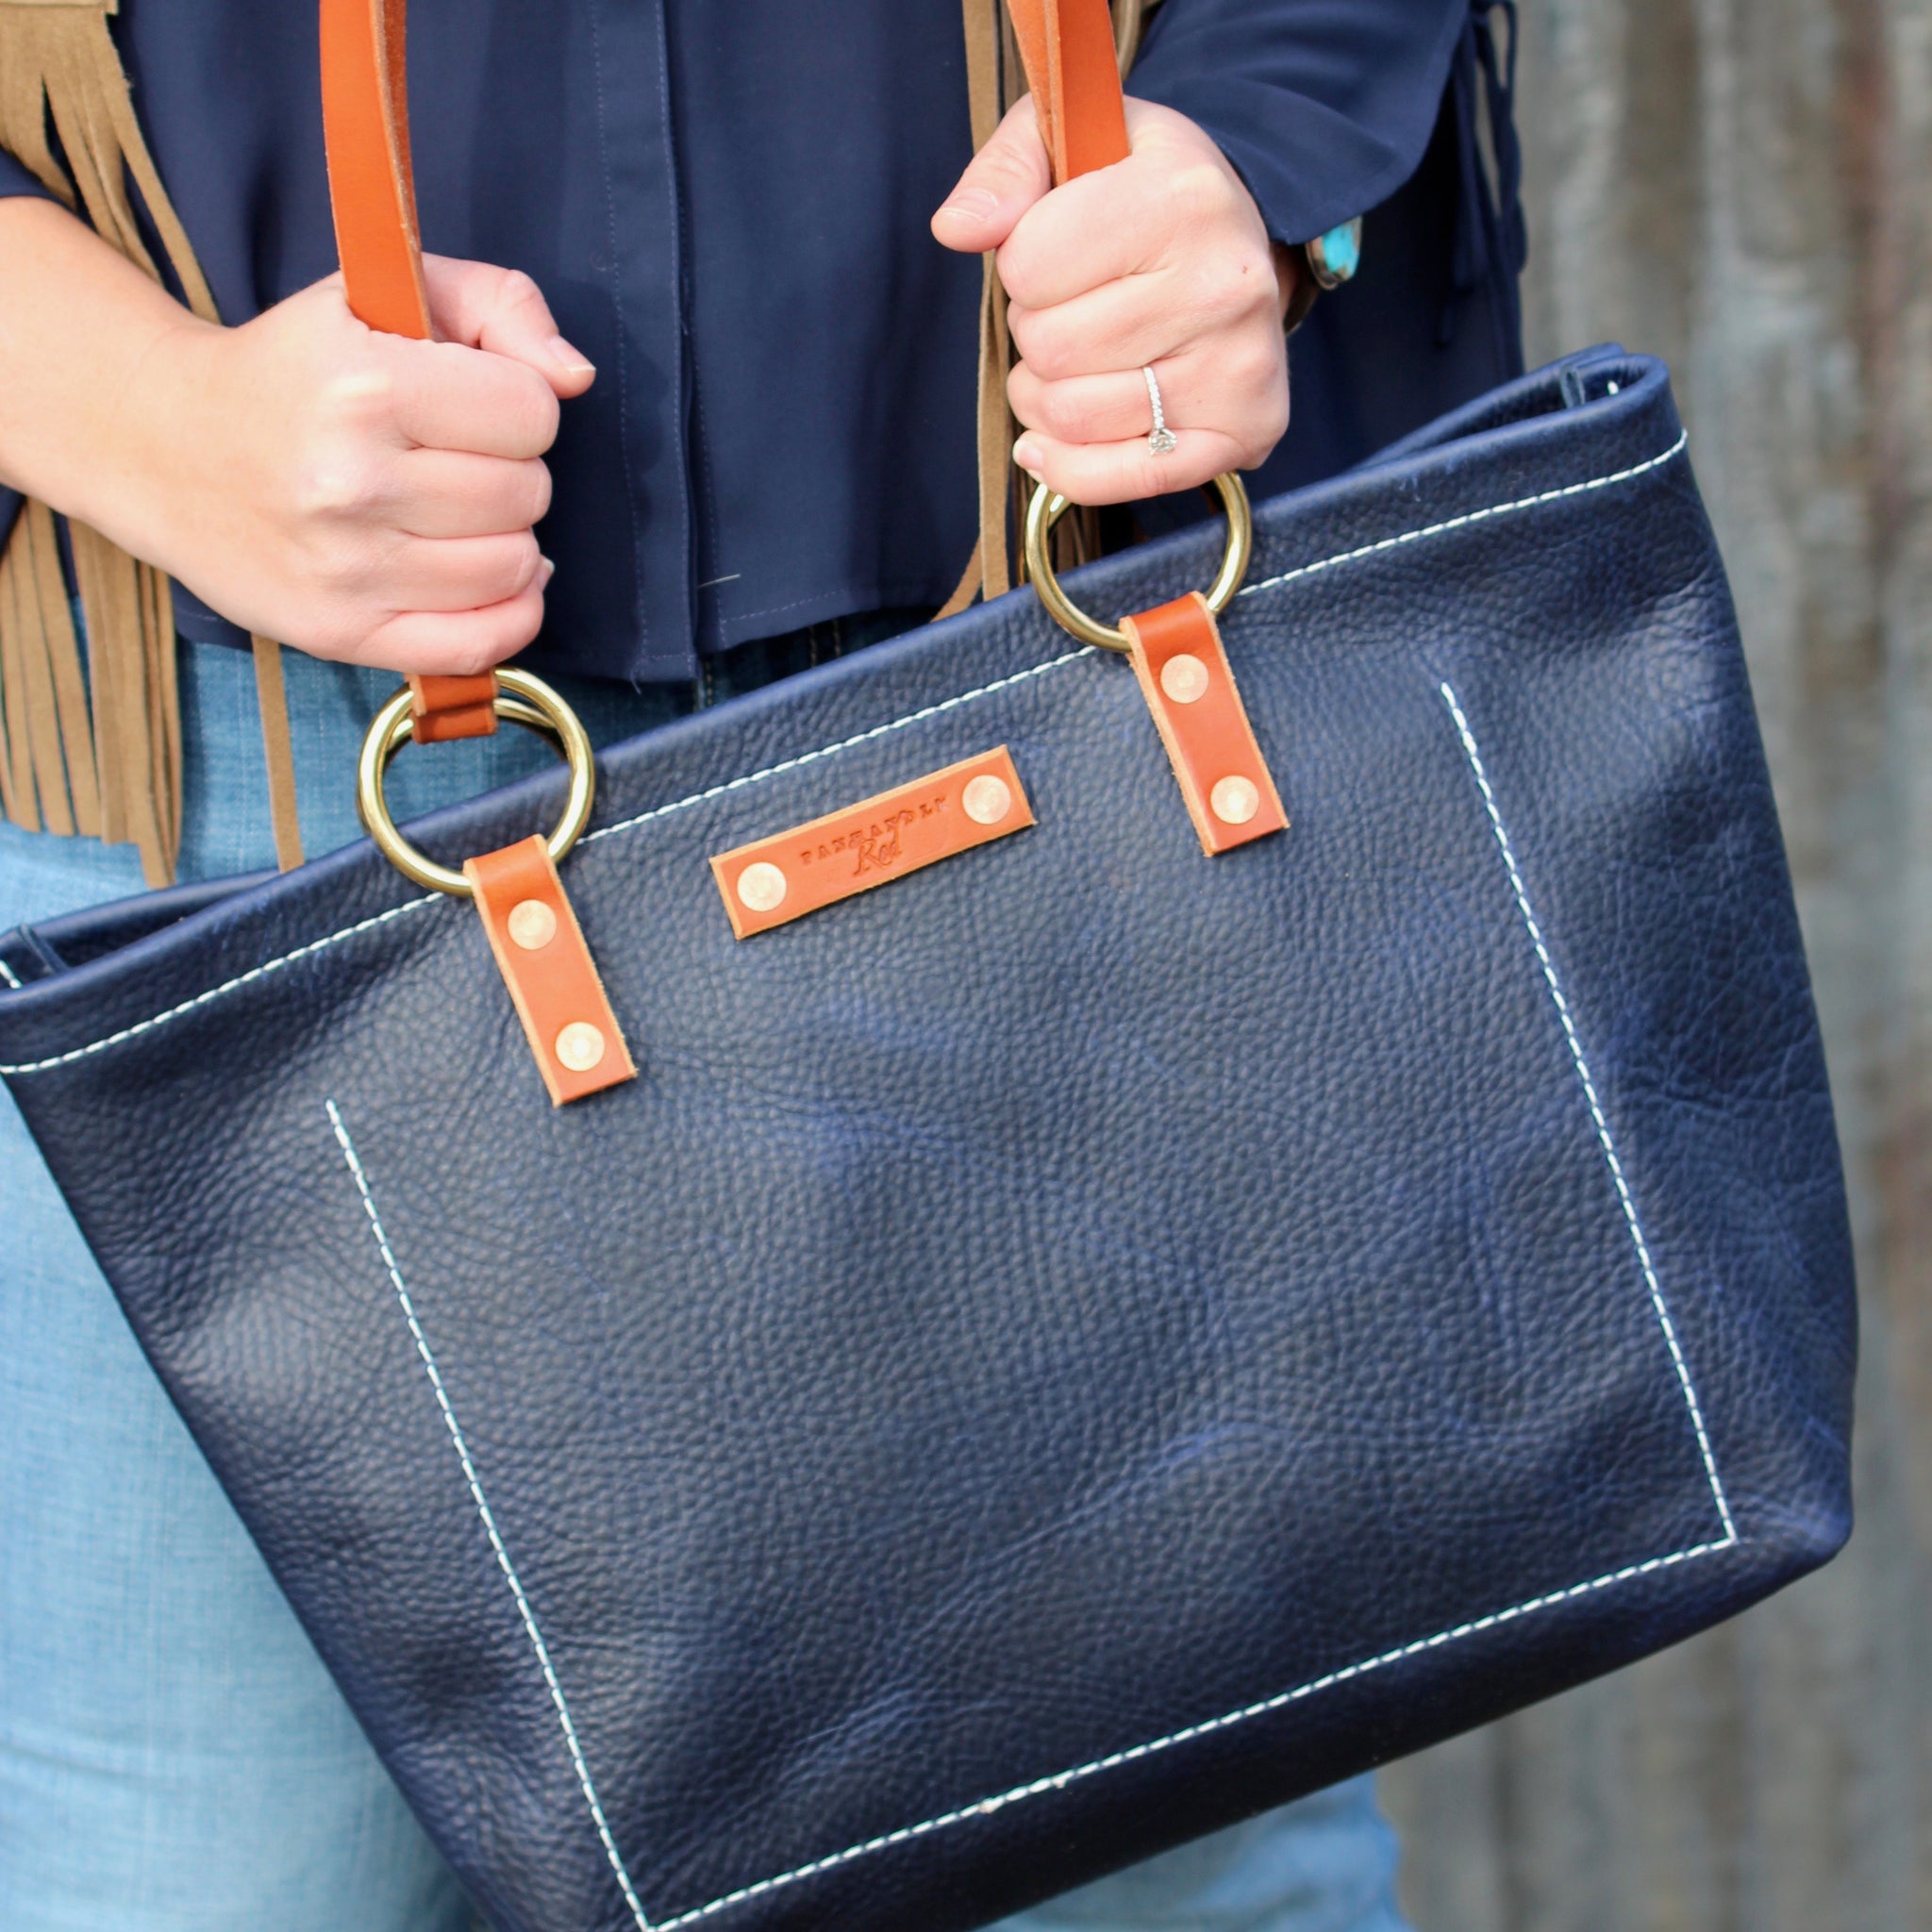 Blue Leather Bag, Blue Leather Tote Bag, Blue Leather Purse, Equestrian Purse, Equestrian Accessories, Purses, handbags, duffles, bags, crossbody purse, gift shop,Panhandle Red Company, Leather Goods, Handbags, Totes, Purses, artisan,  Full-grain leather items, custom gifts, handcrafted gift, idaho shops, leather shop